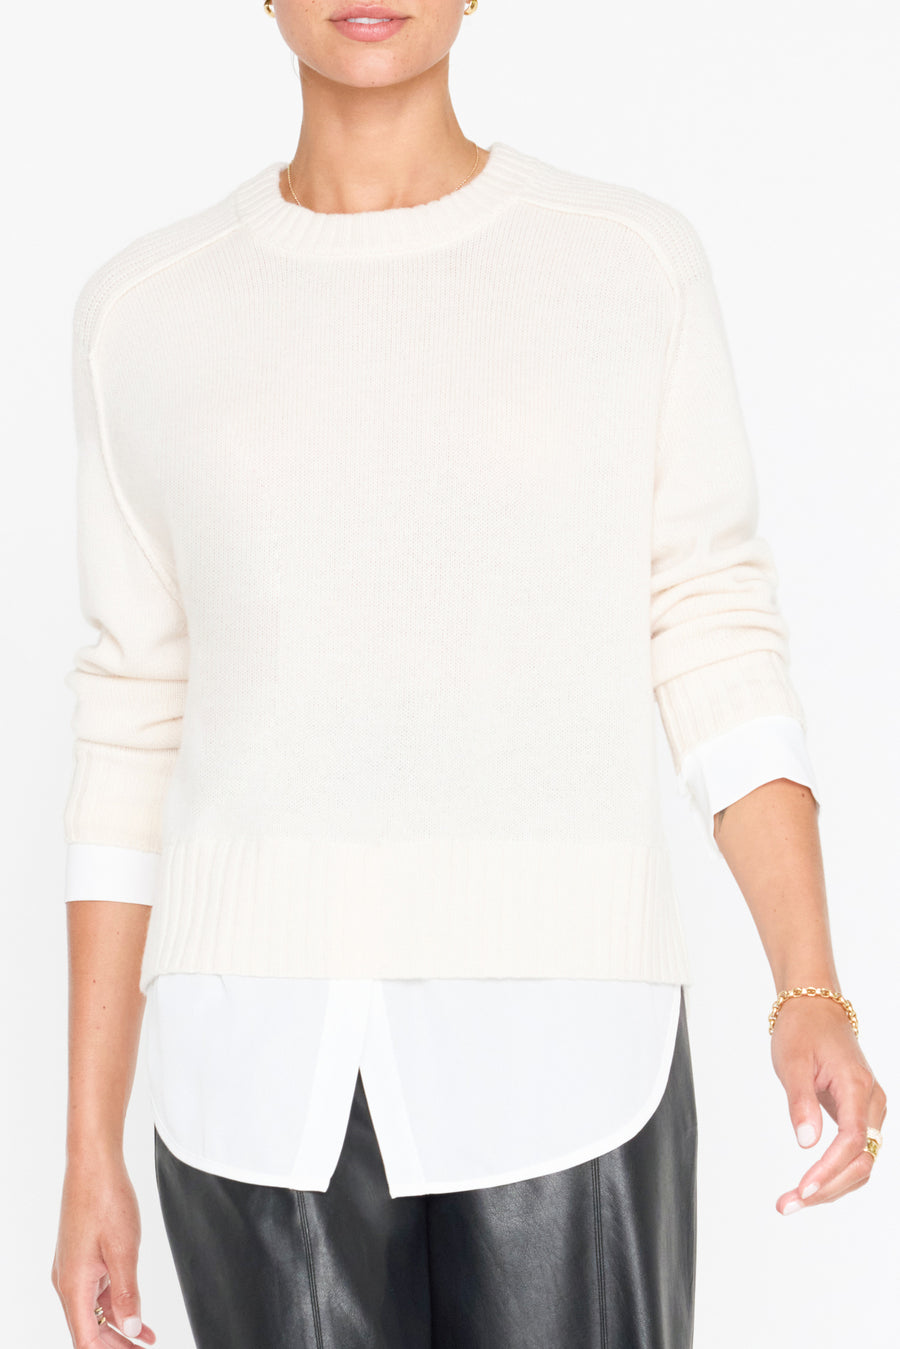 Parson cashmere-wool layered crewneck white sweater front view